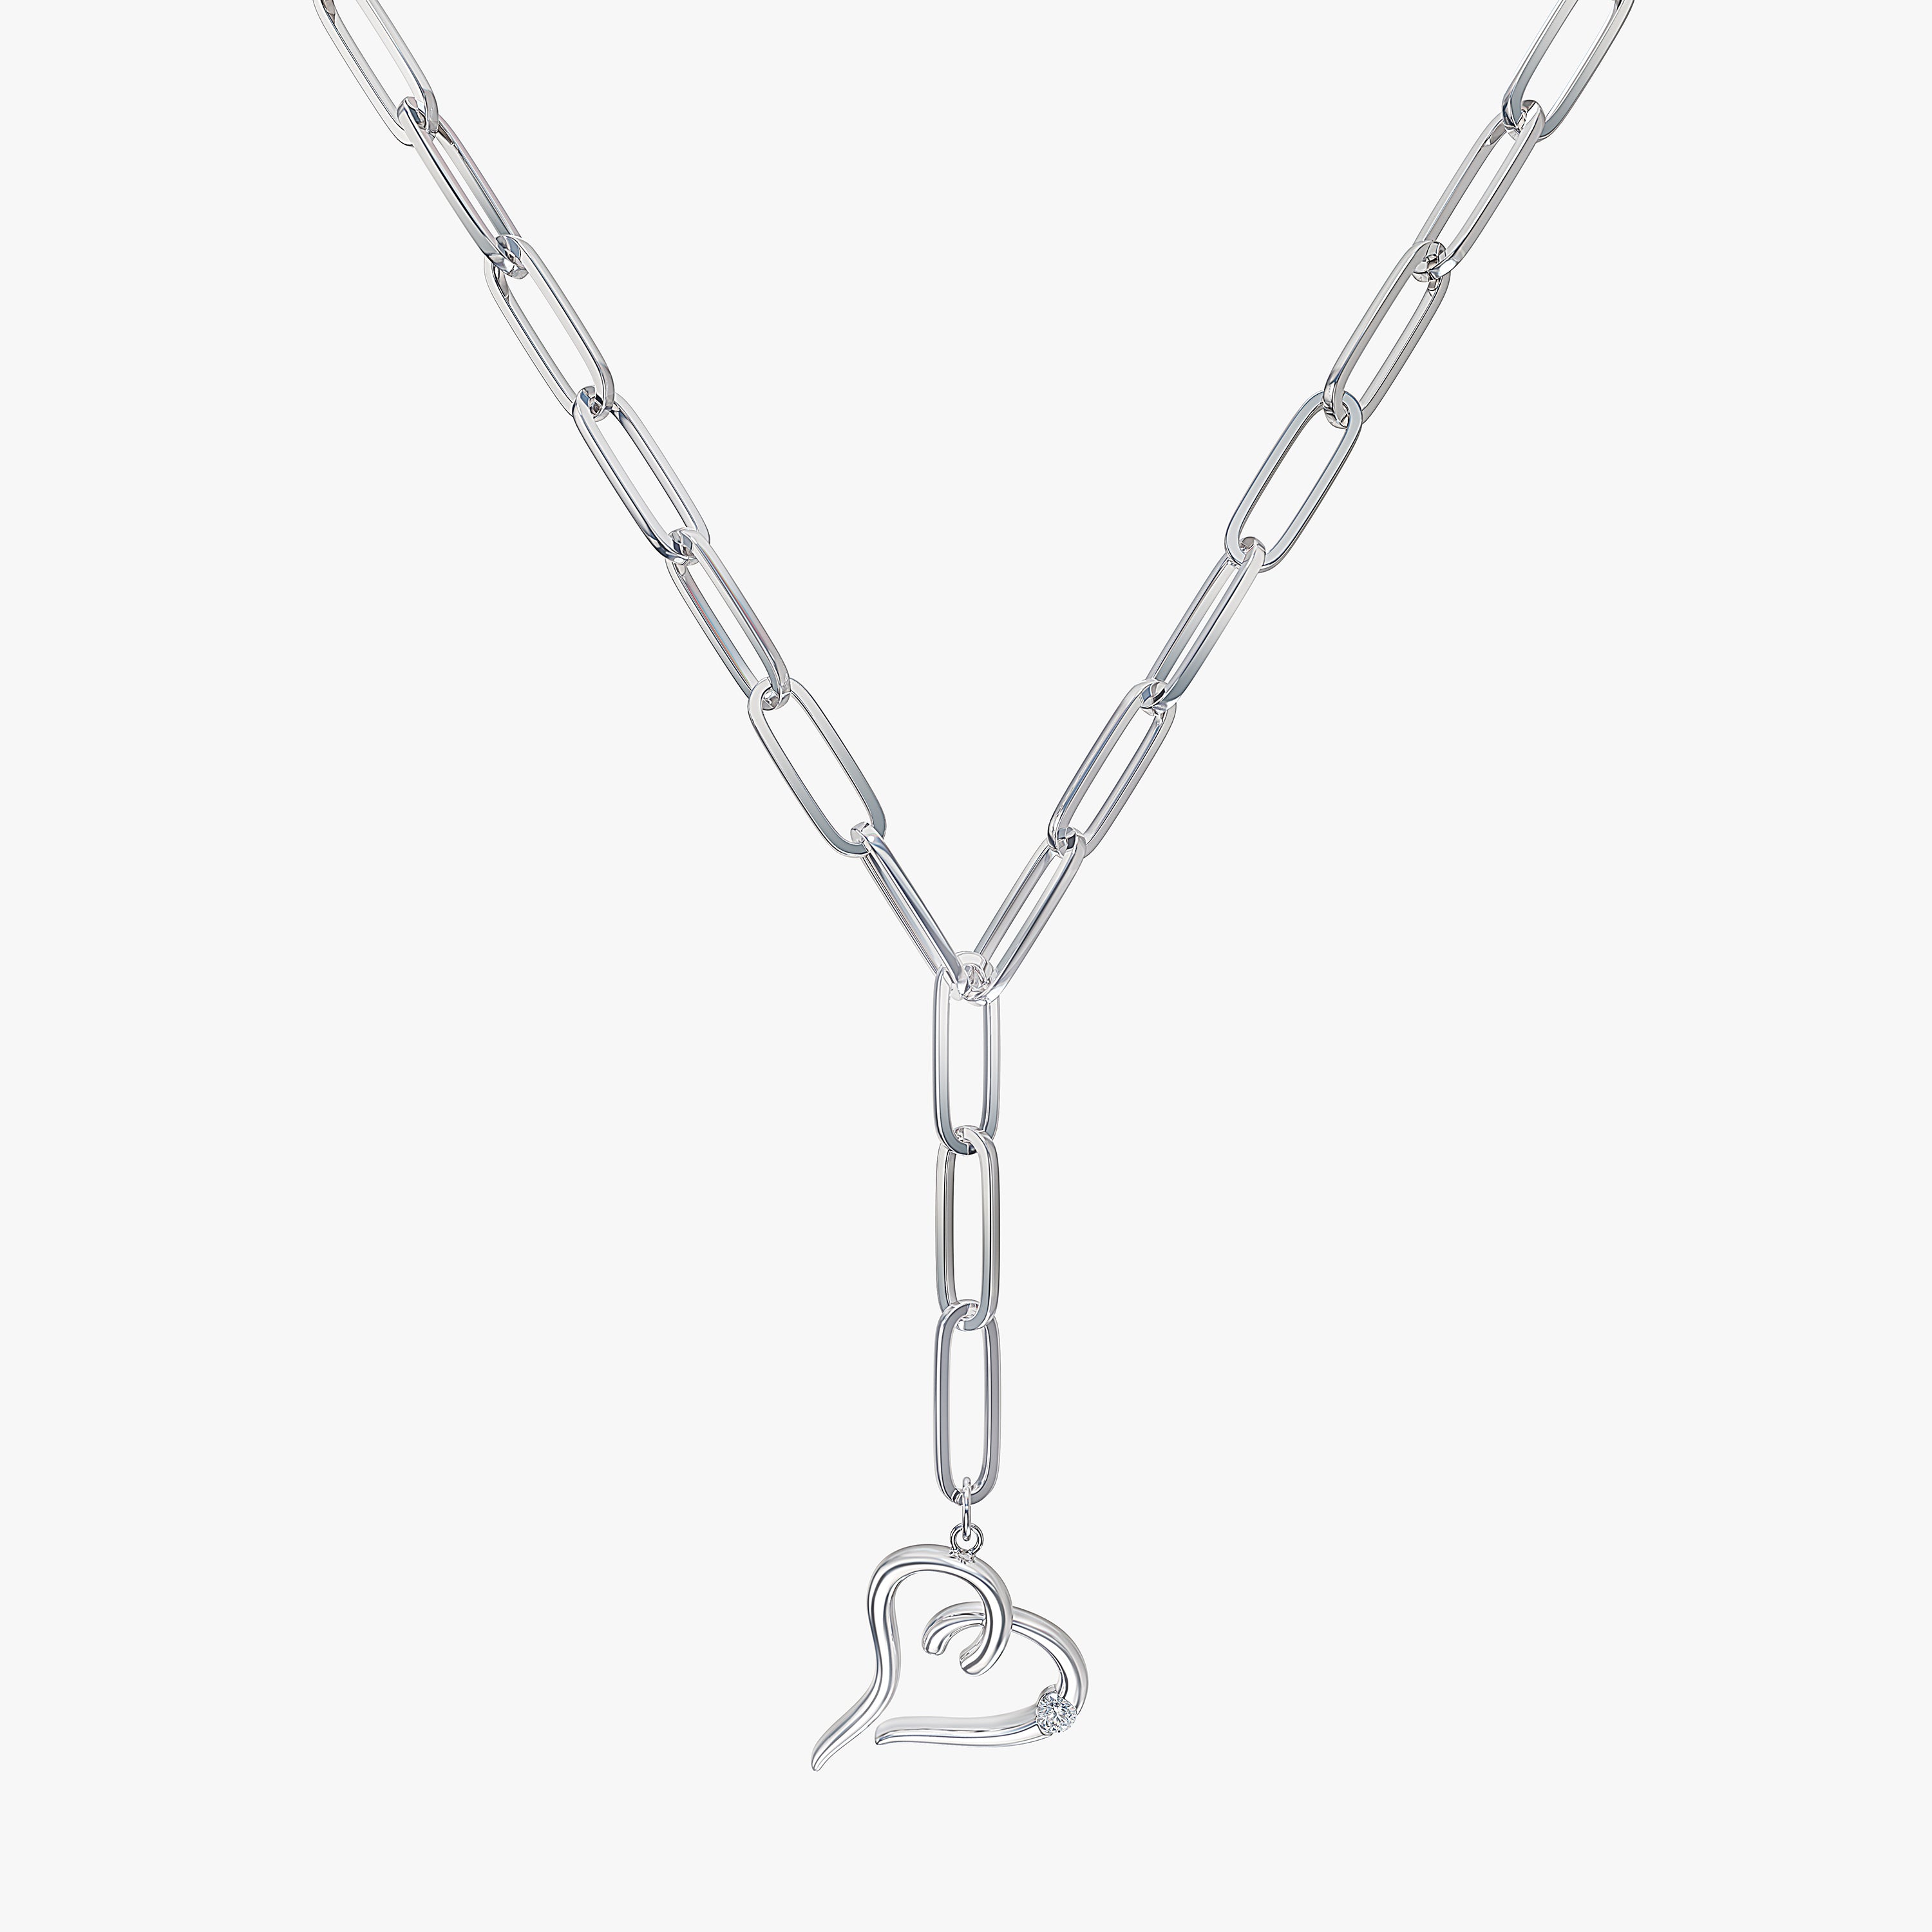 Large Open Link Lariat Necklace